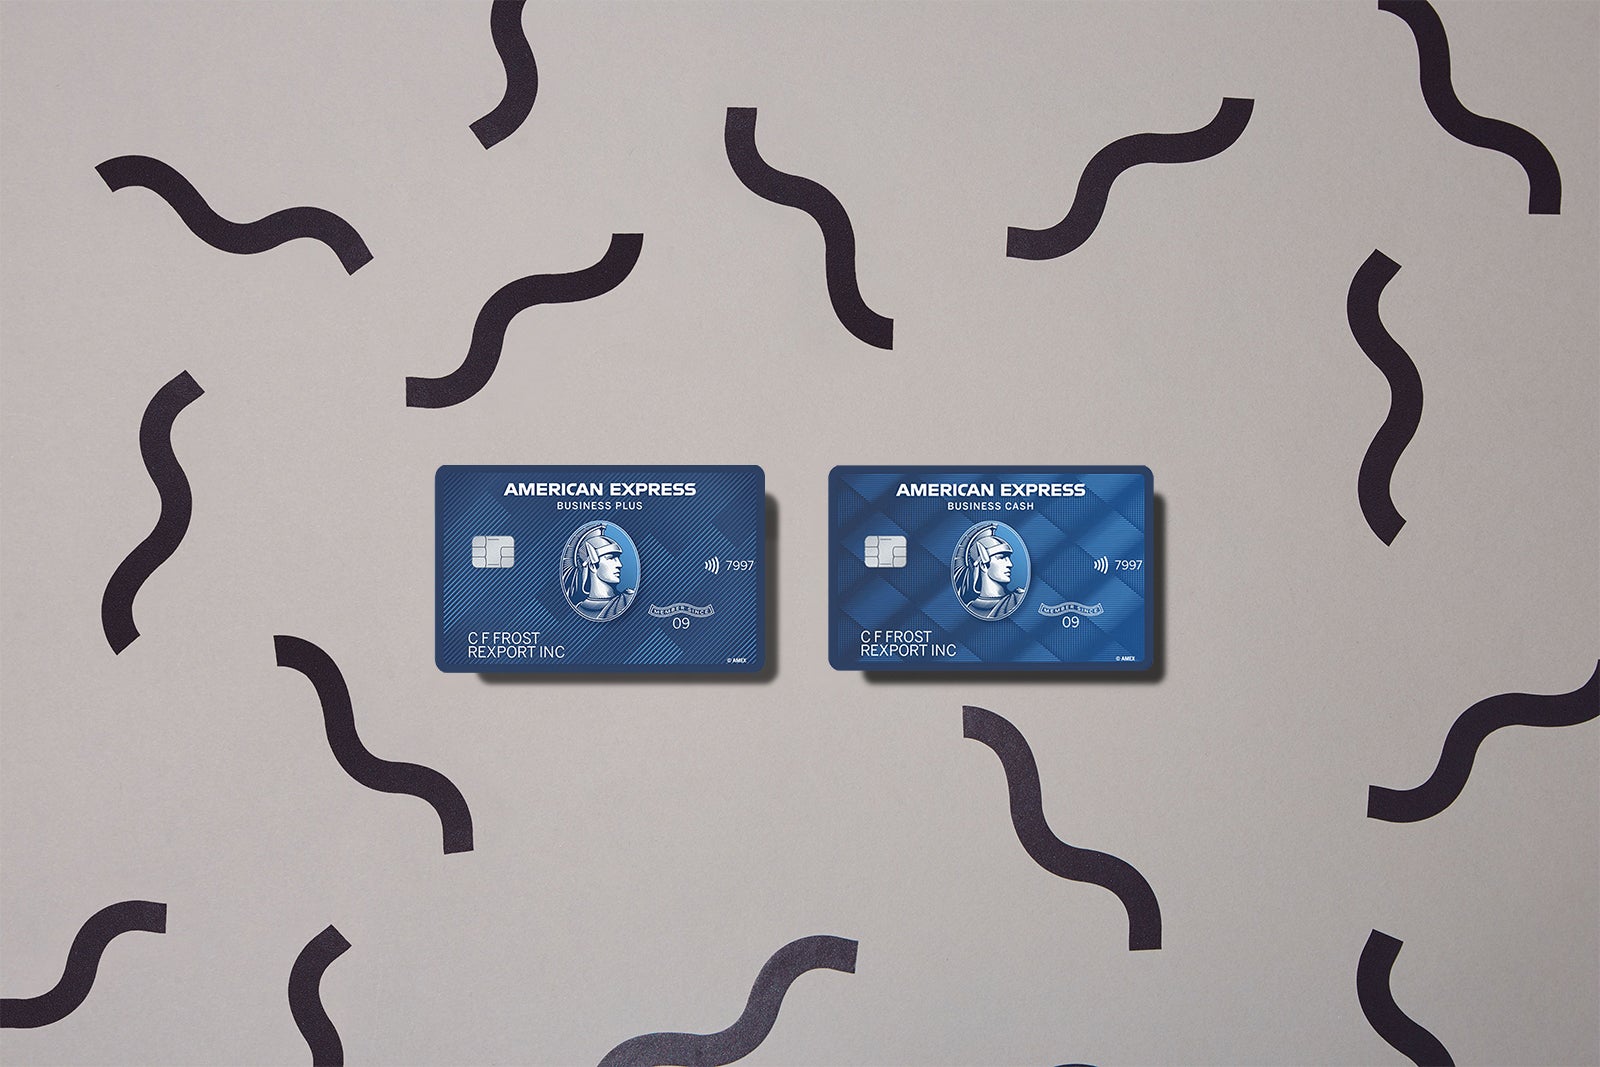 American Express - The Basic Business Charge Card